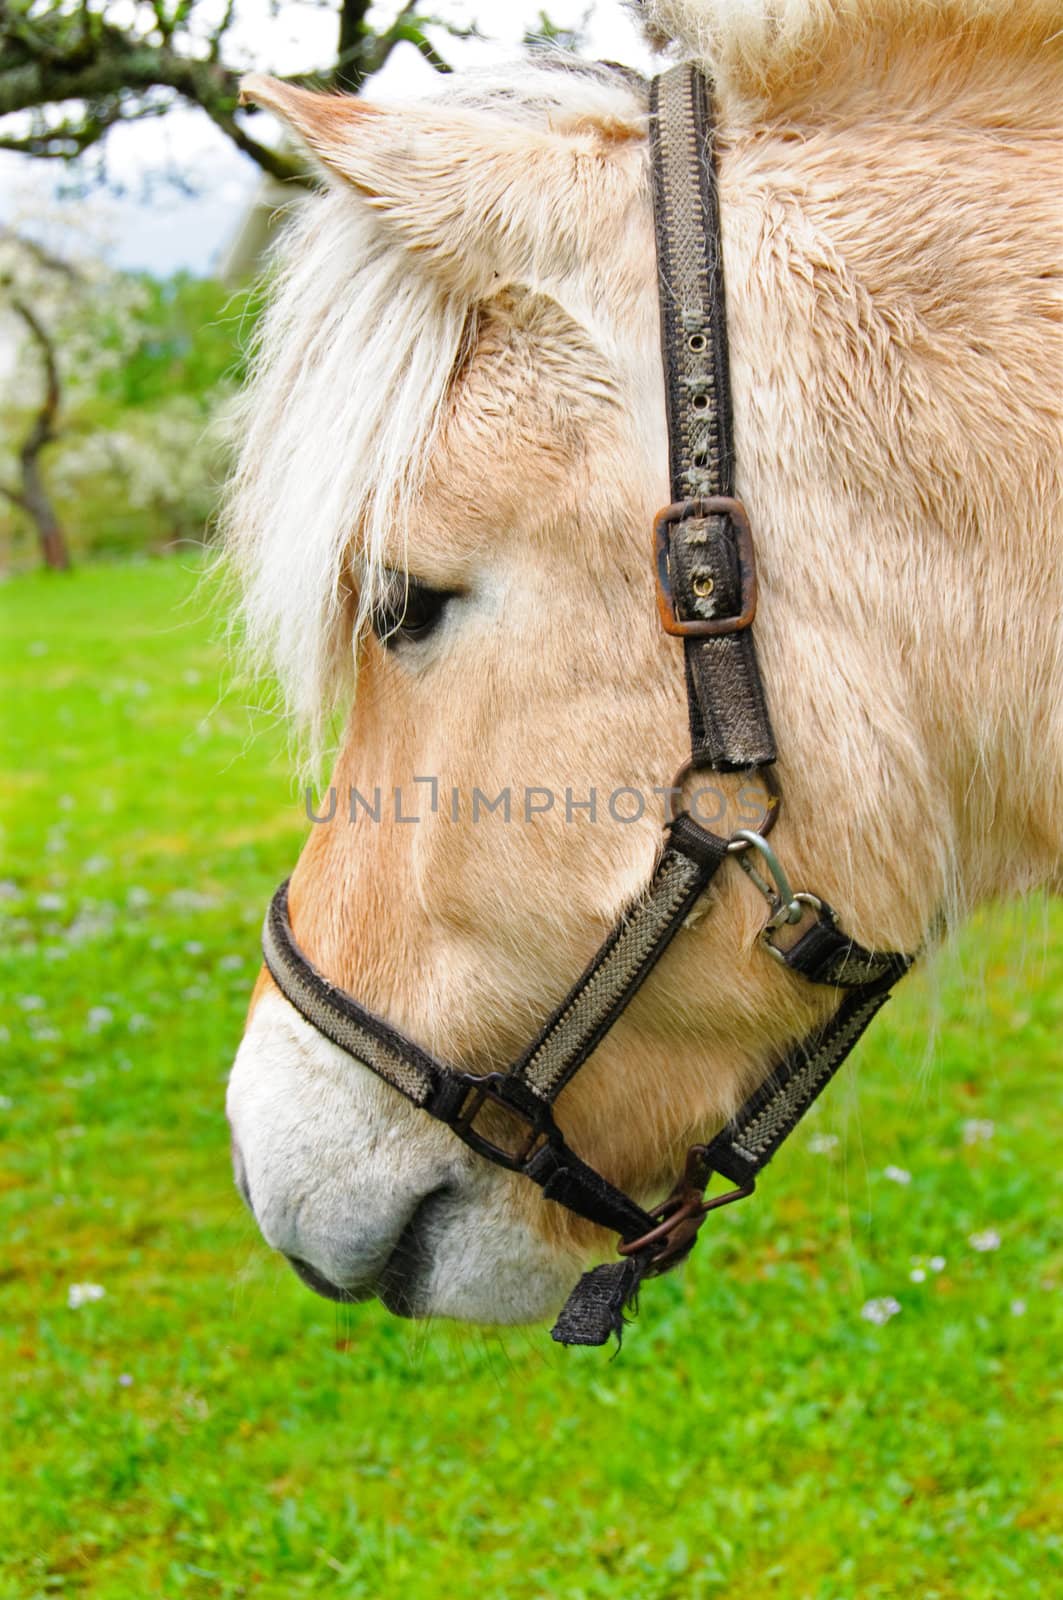 The head of a cute horse with the bridle on